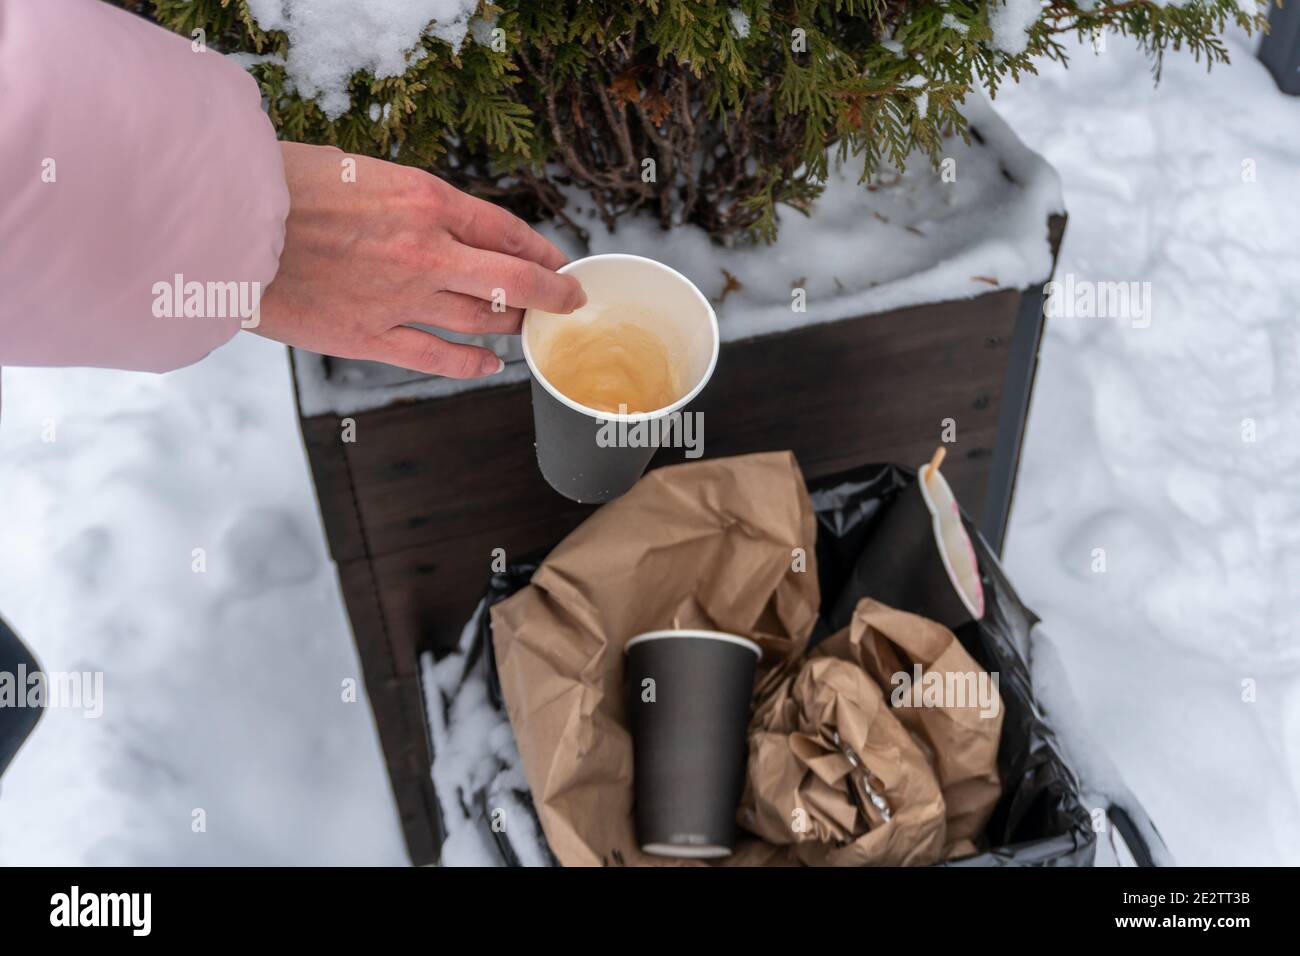 Used coffee cup in the trash can female hand throws out trash, taking care of nature Stock Photo